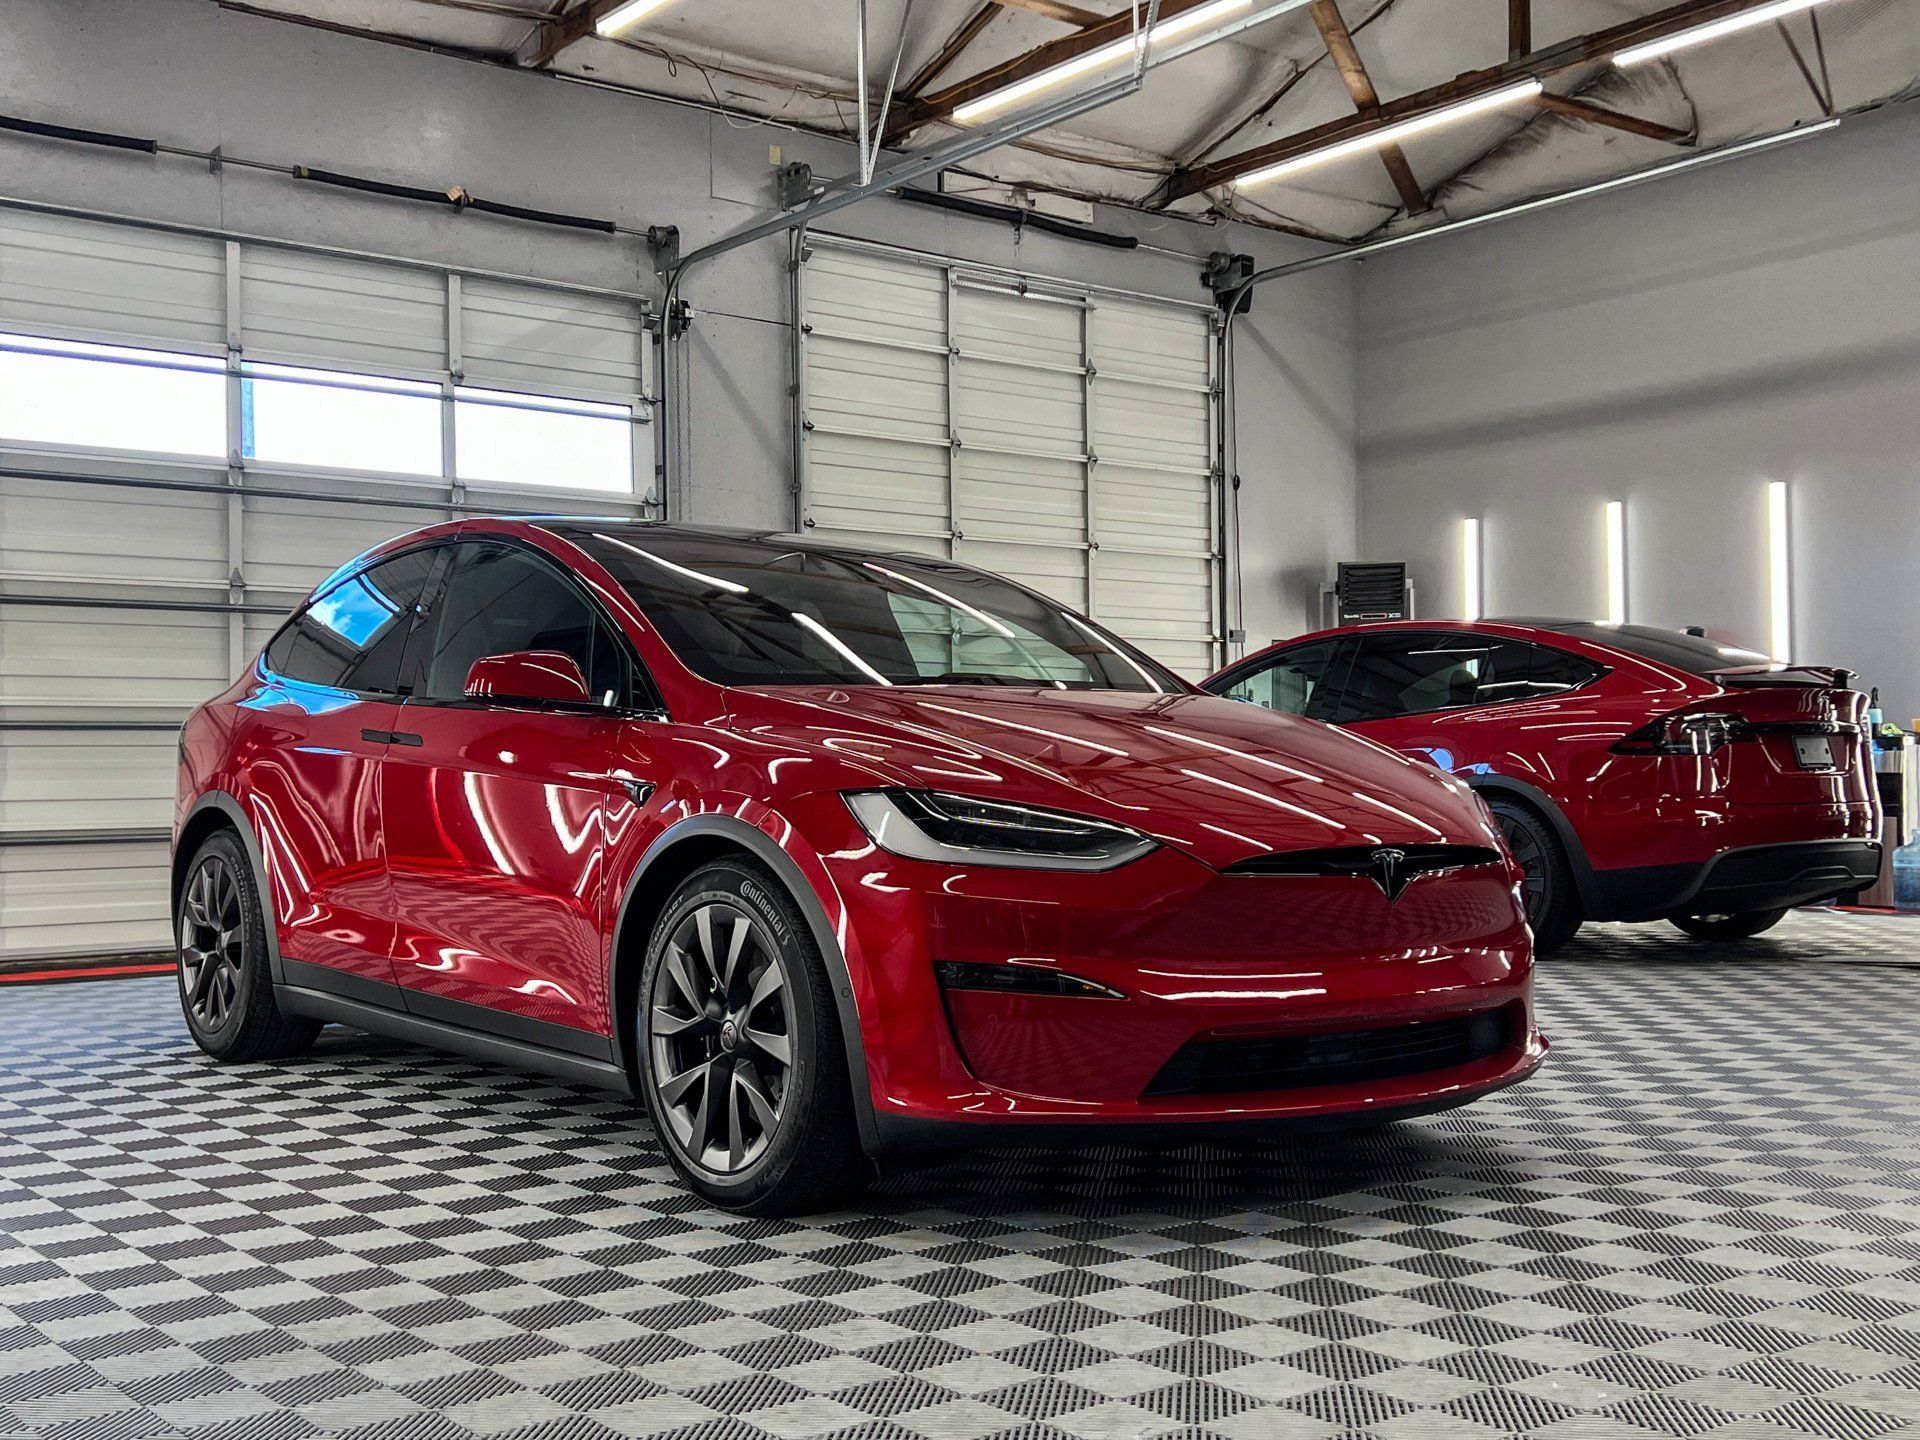 Two red tesla model xs are parked in a garage.